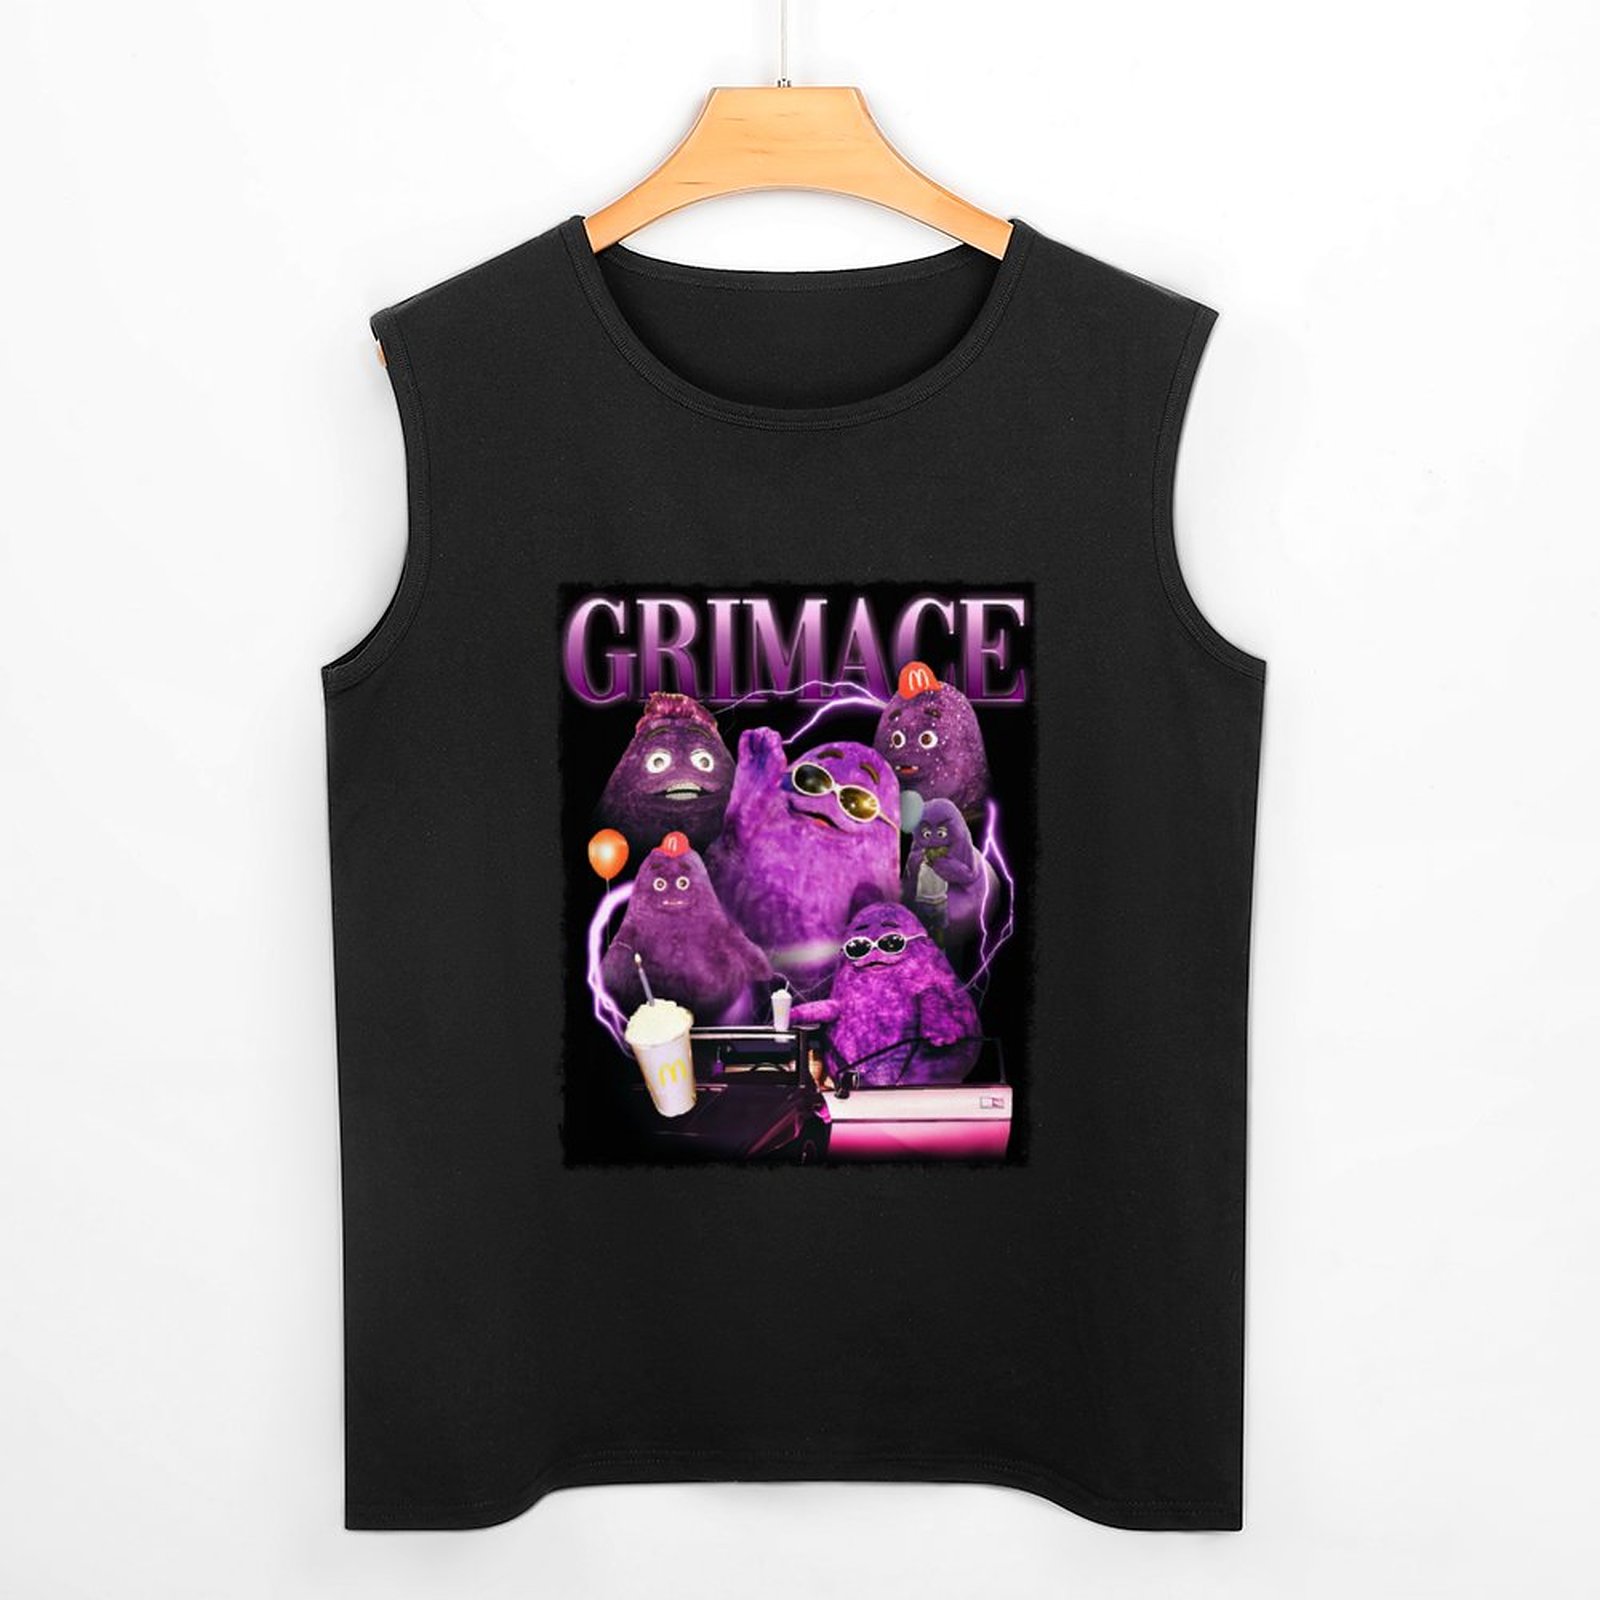 New Grimace in 90s Y2k Style Tribute Tank Top Vest gym top clothes for men summer 2 - Grimace Plush